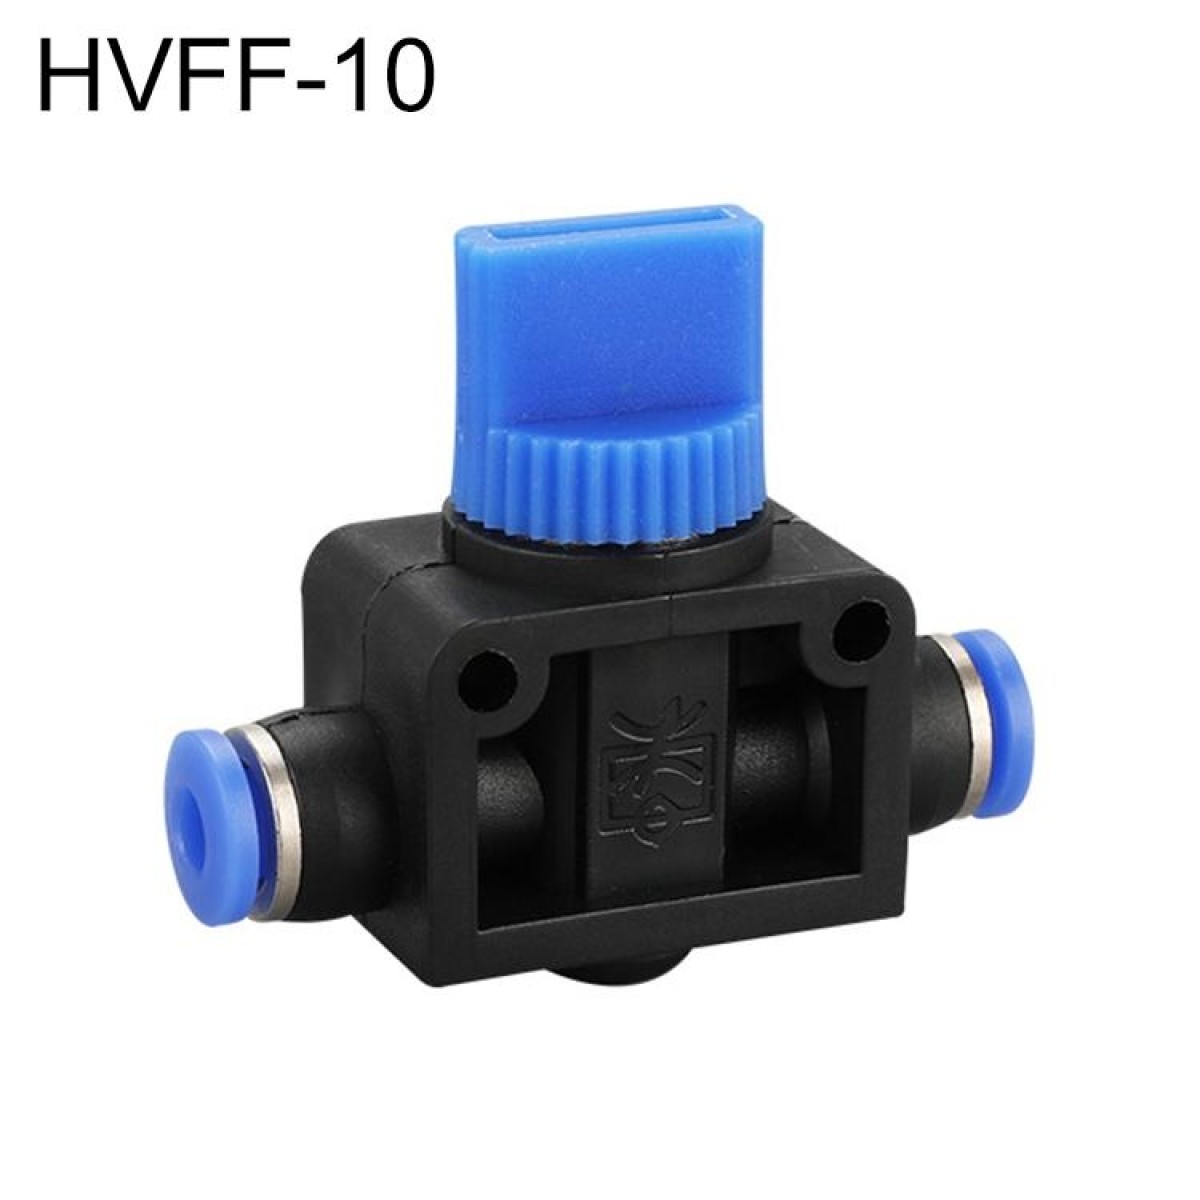 HVFF-10 LAIZE Manual Valve Pneumatic Quick Fitting Connector